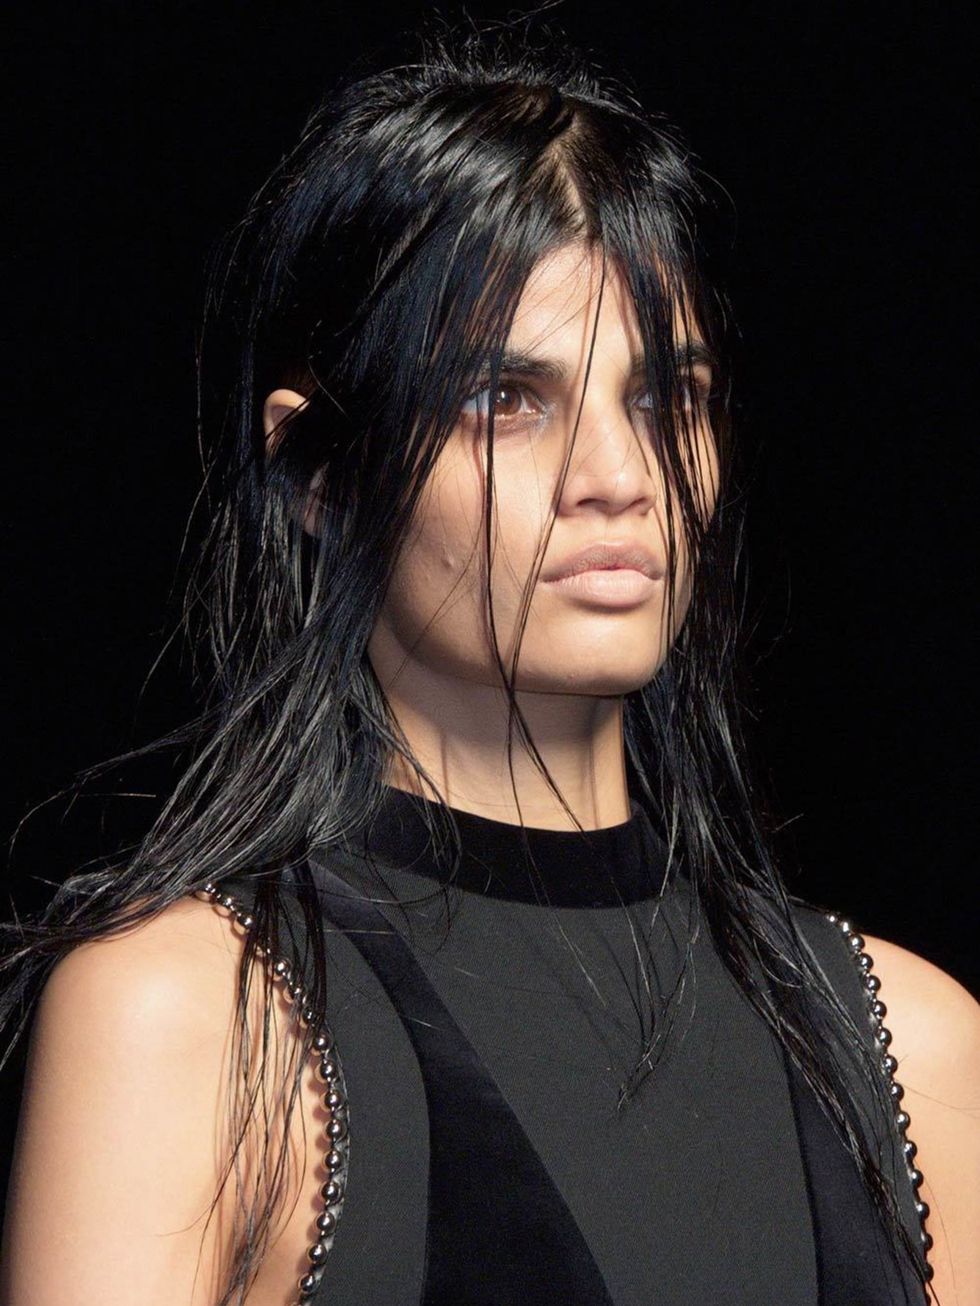 <p><strong><a href="http://www.elleuk.com/catwalk/alexander-wang/autumn-winter-2015">Alexander Wang</a></strong></p>

<p>The look: Ghoulish</p>

<p>Make-up artist: <a href="http://www.elleuk.com/beauty/the-beauty-experts-you-need-to-know-charlotte-tilbury